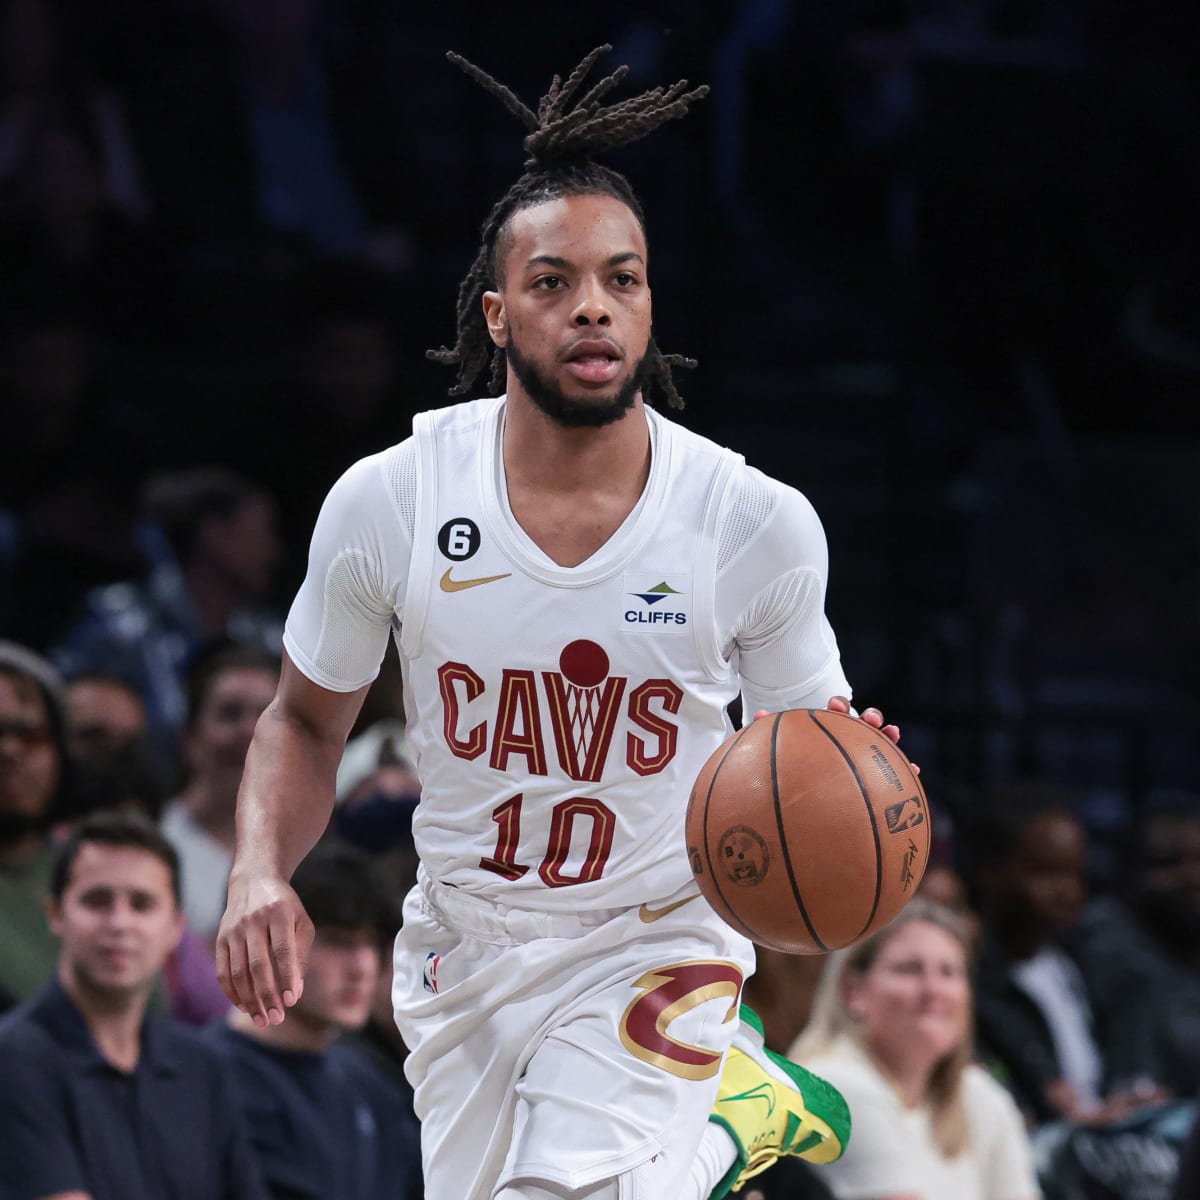 Cavs' Darius Garland finding rhythm again after strong start in second  season - The Athletic